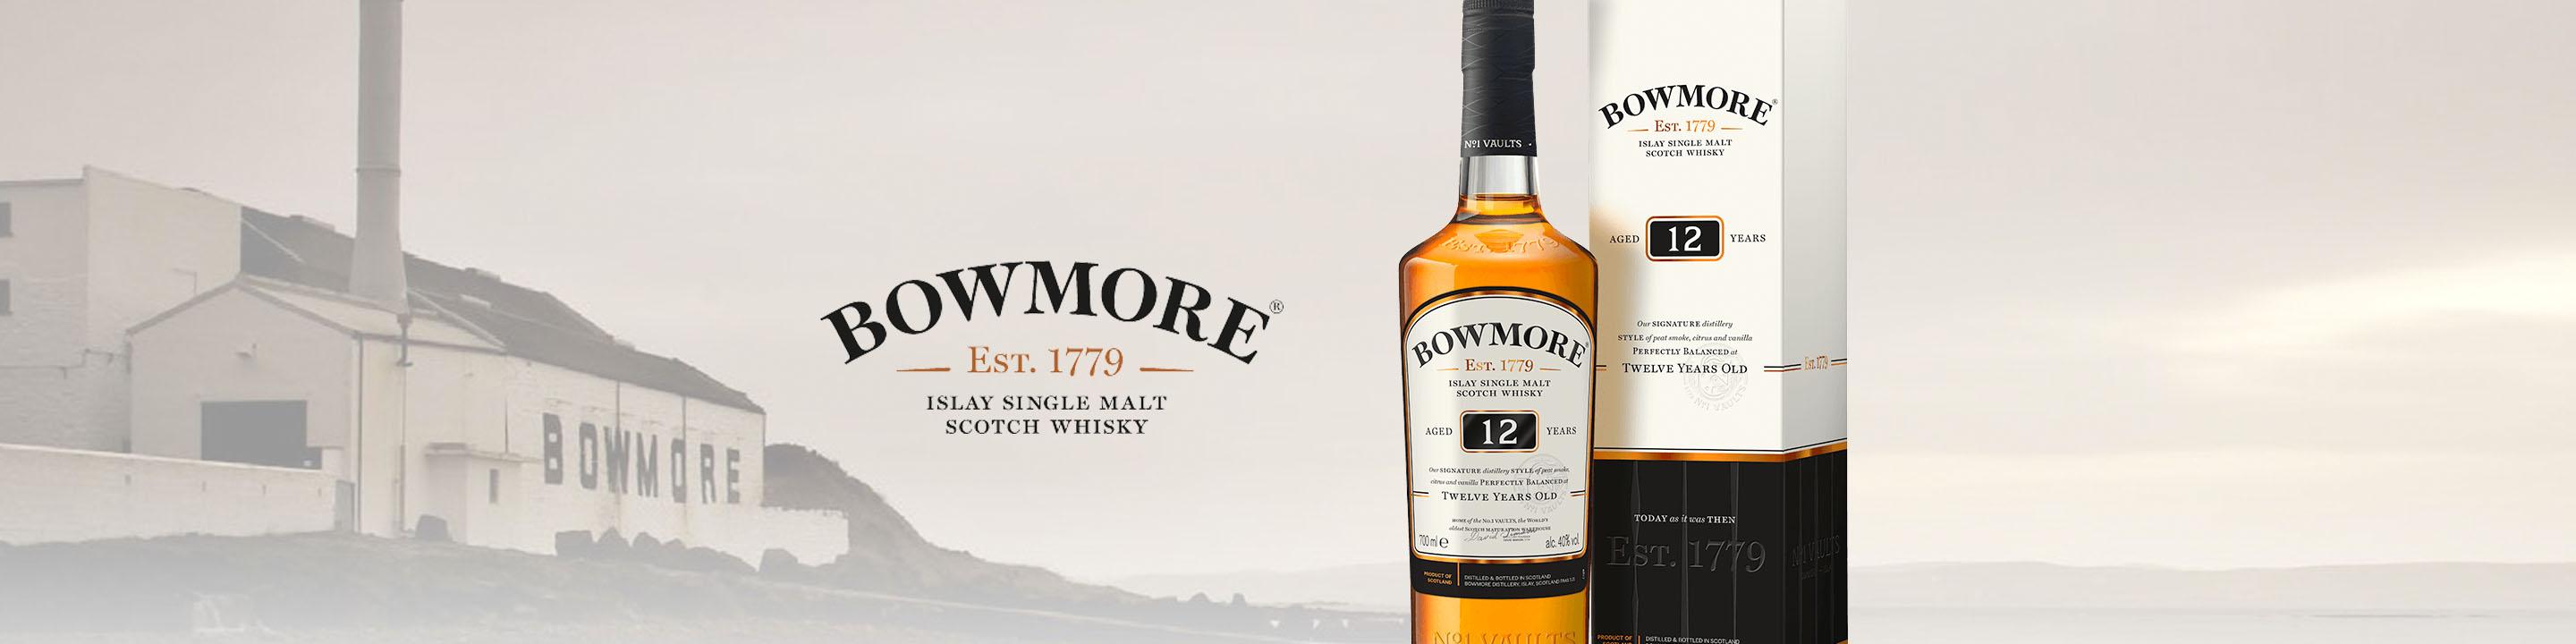 Founded in Islay in 1779, Bowmore is the home of the world's oldest Scotch Maturation Warehouse, The Legendary No.1 Vaults.

Buy Bowmore online now from nearby liquor stores via Minibar Delivery.